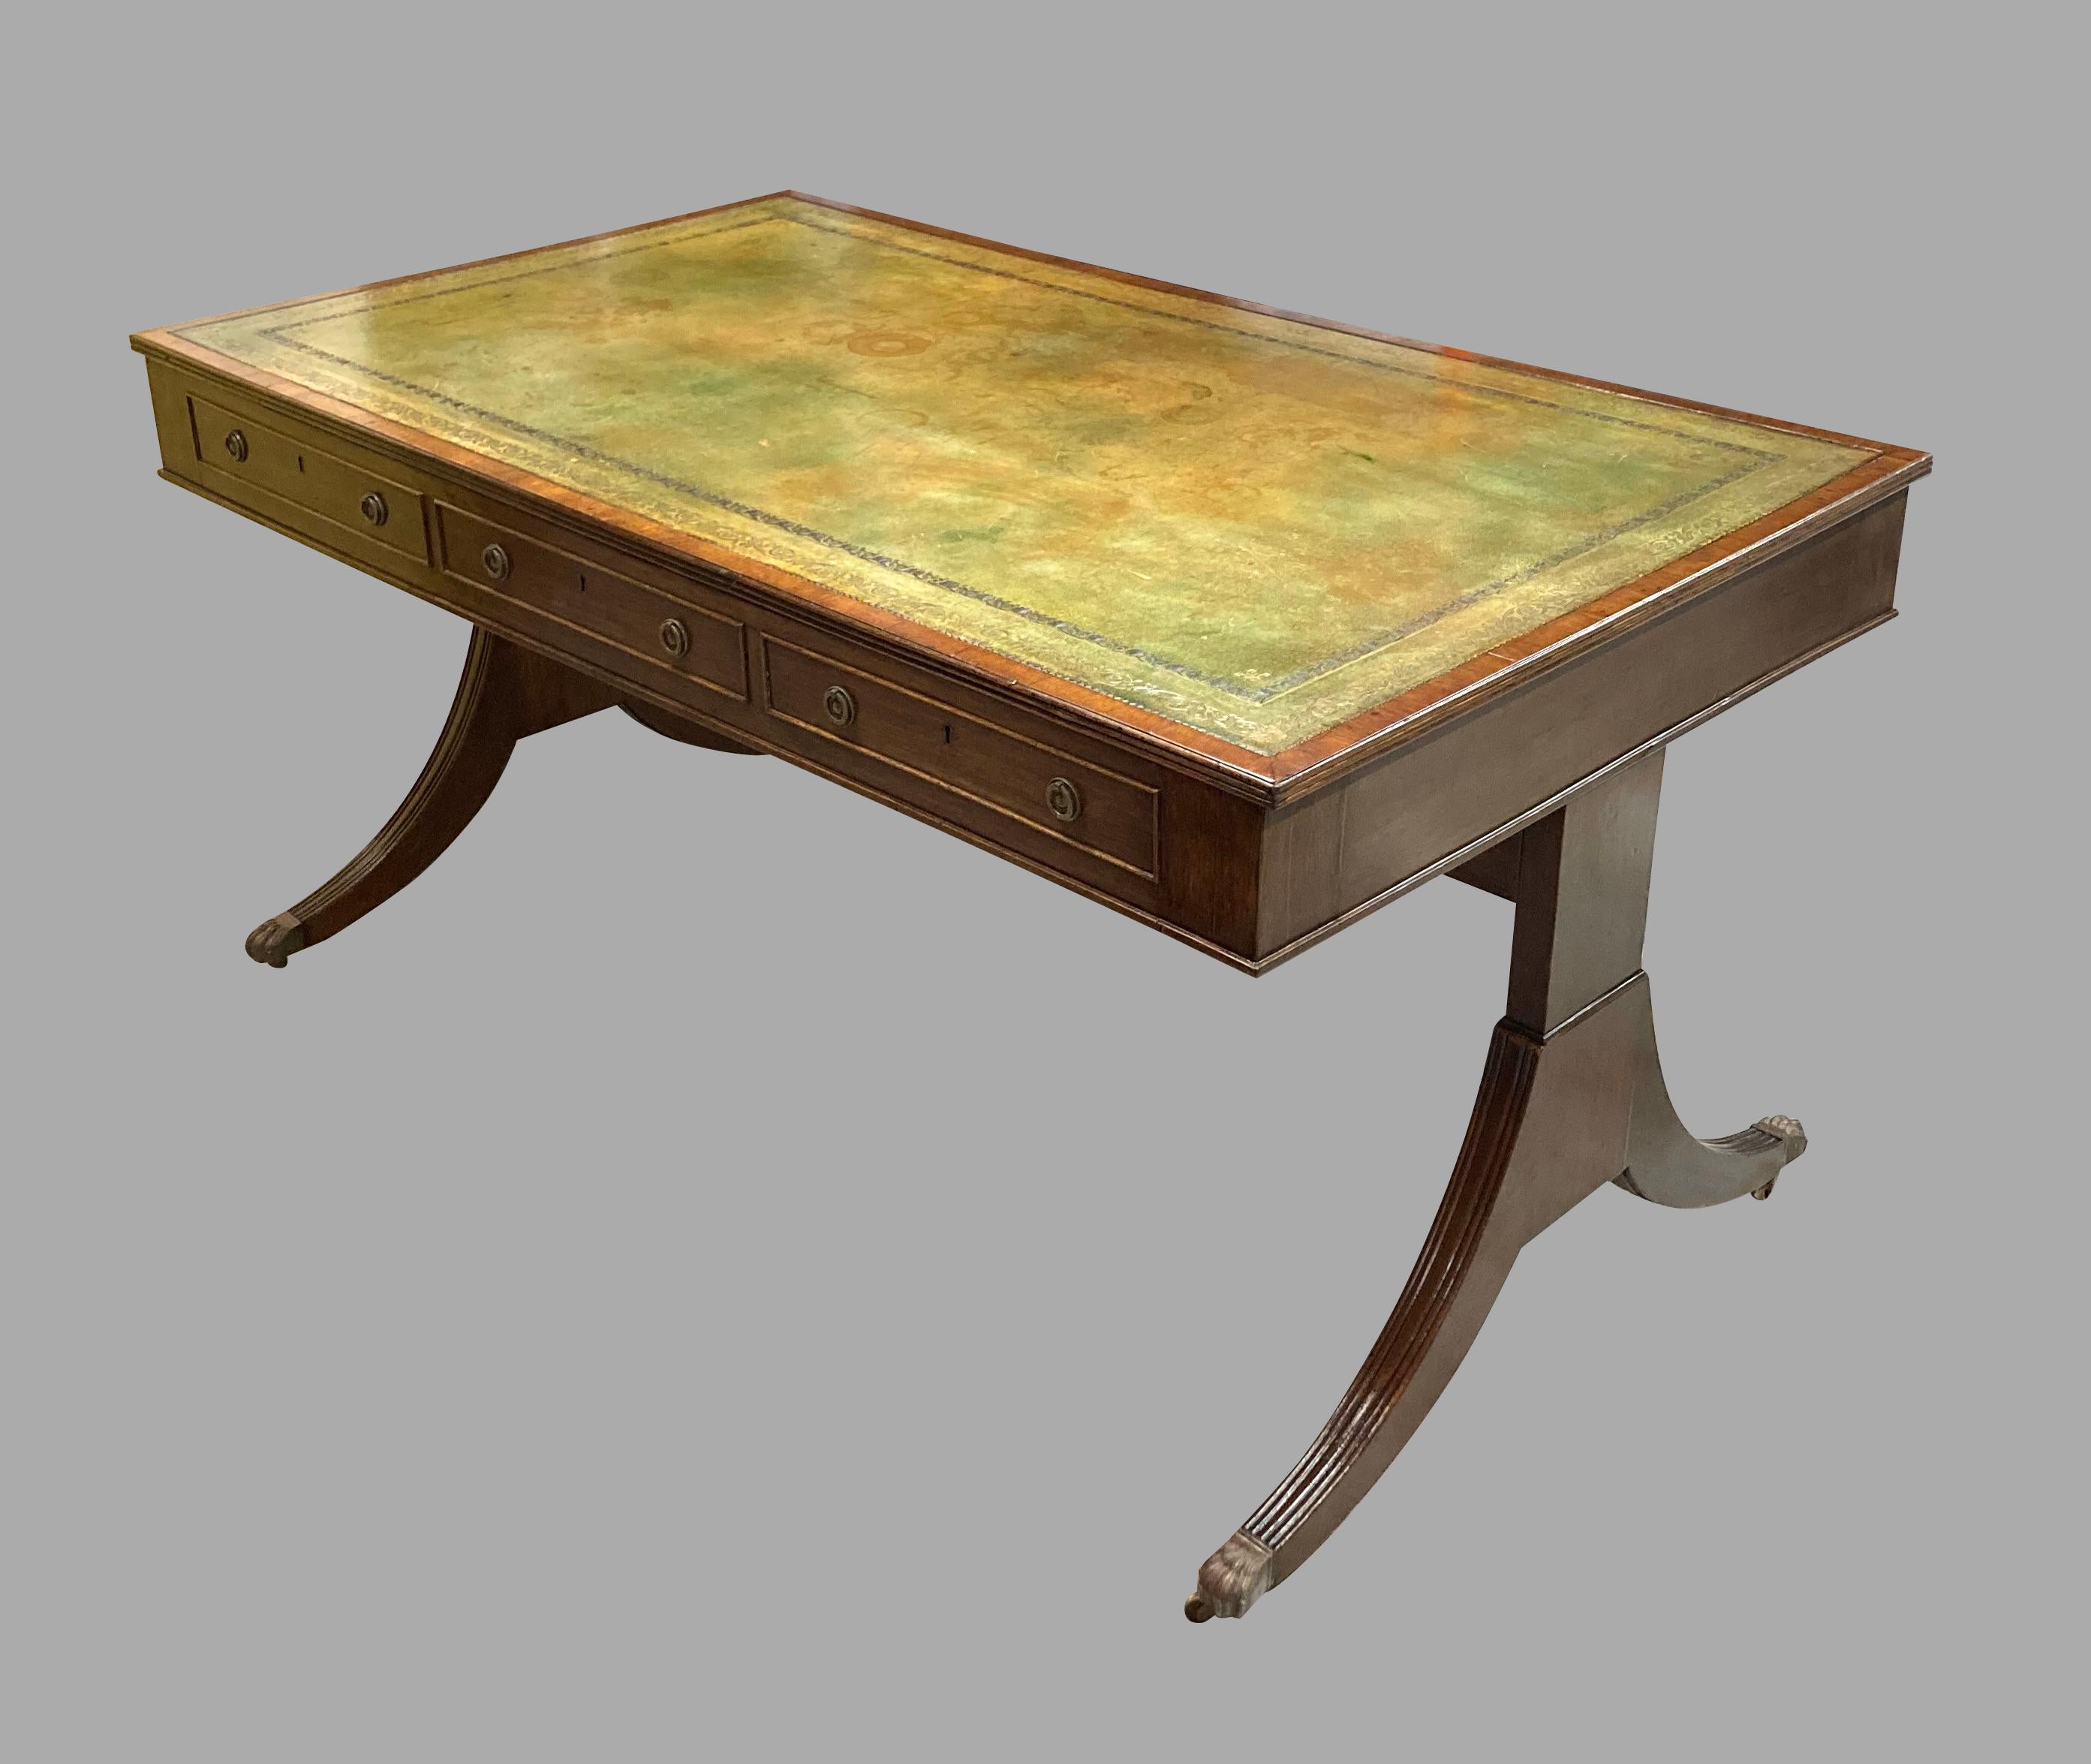 English Regency Style Mahogany Writing Table with Gilt-Tooled Leather Top In Good Condition For Sale In San Francisco, CA